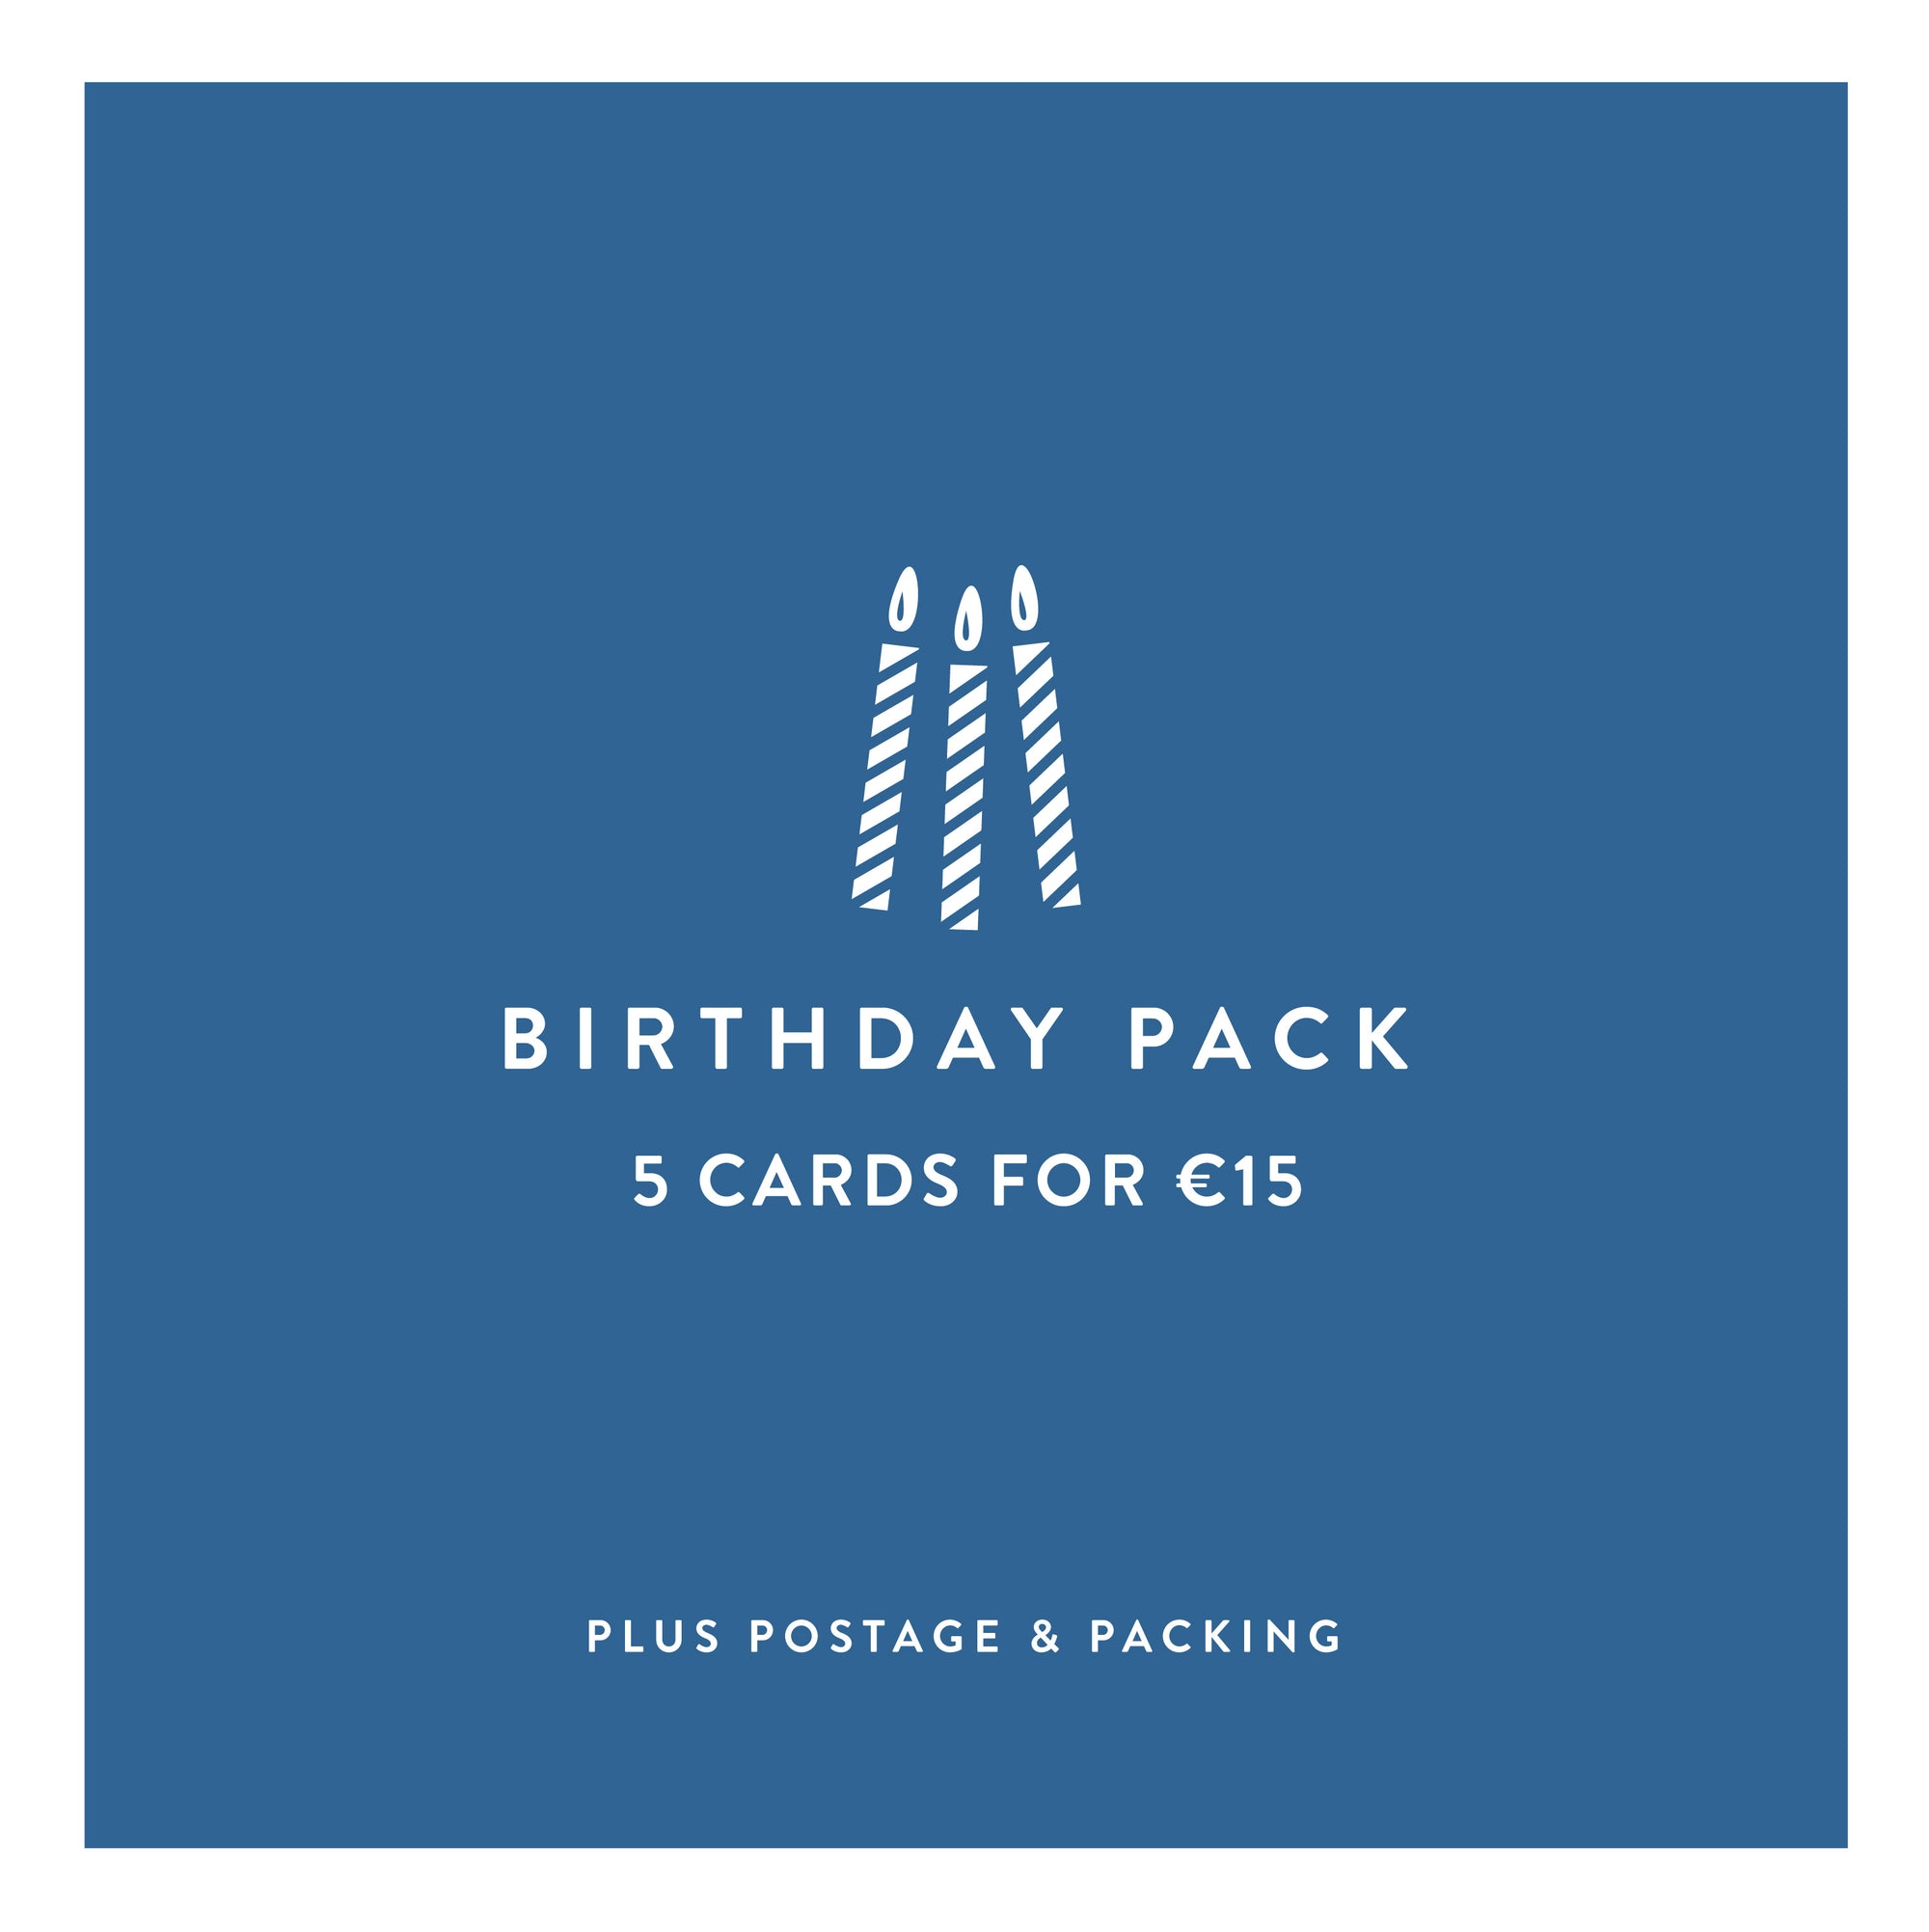 Birthday pack - 5 cards for €15